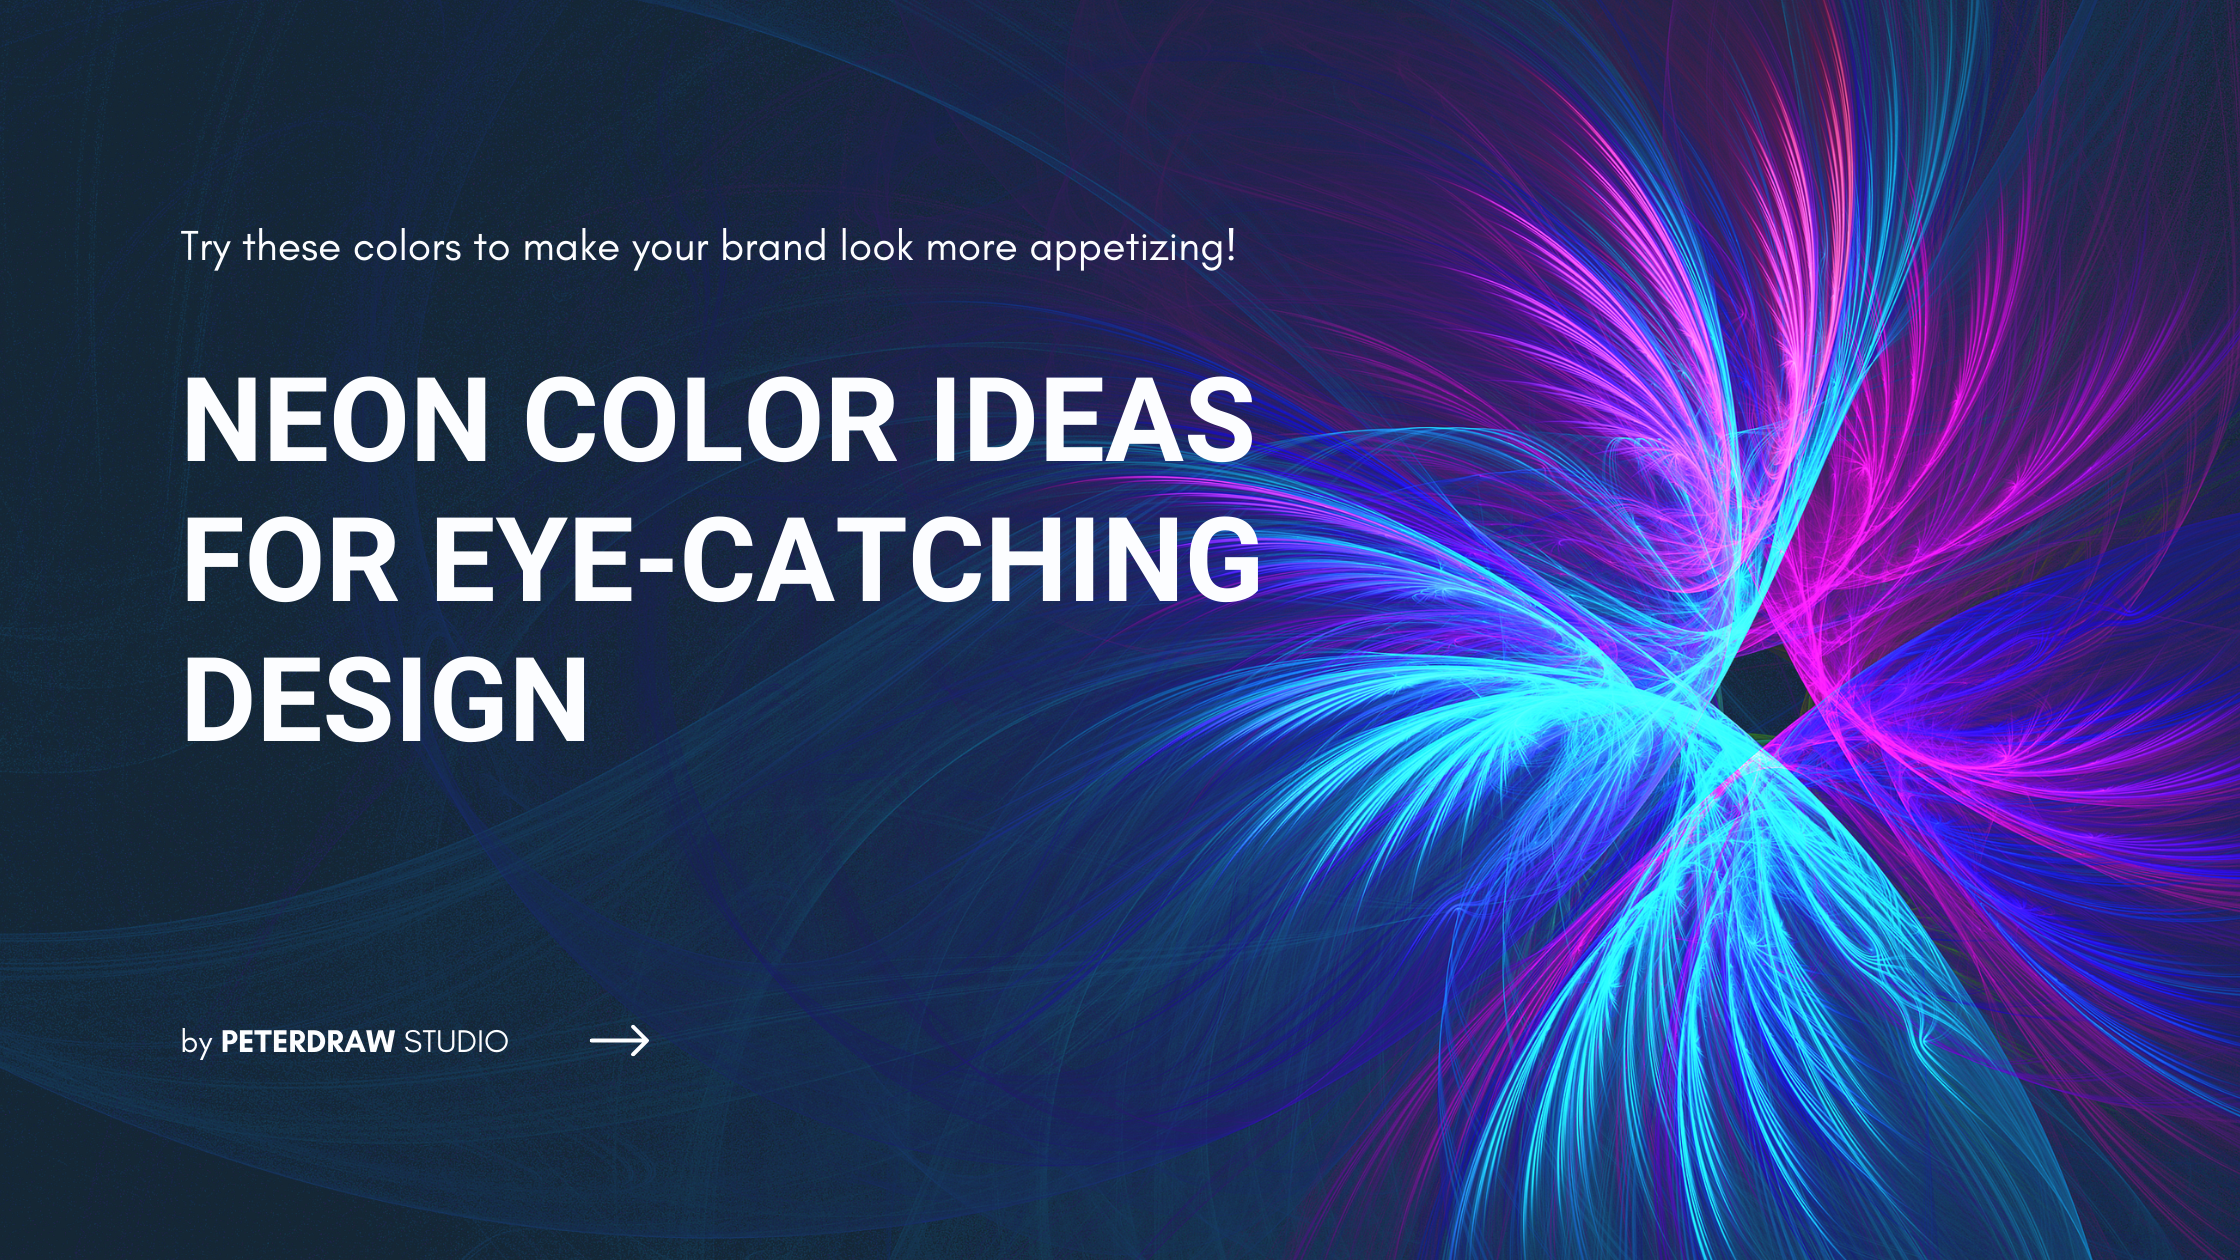 How To Use Neon Or Fluorescent Colors In Branding & Design